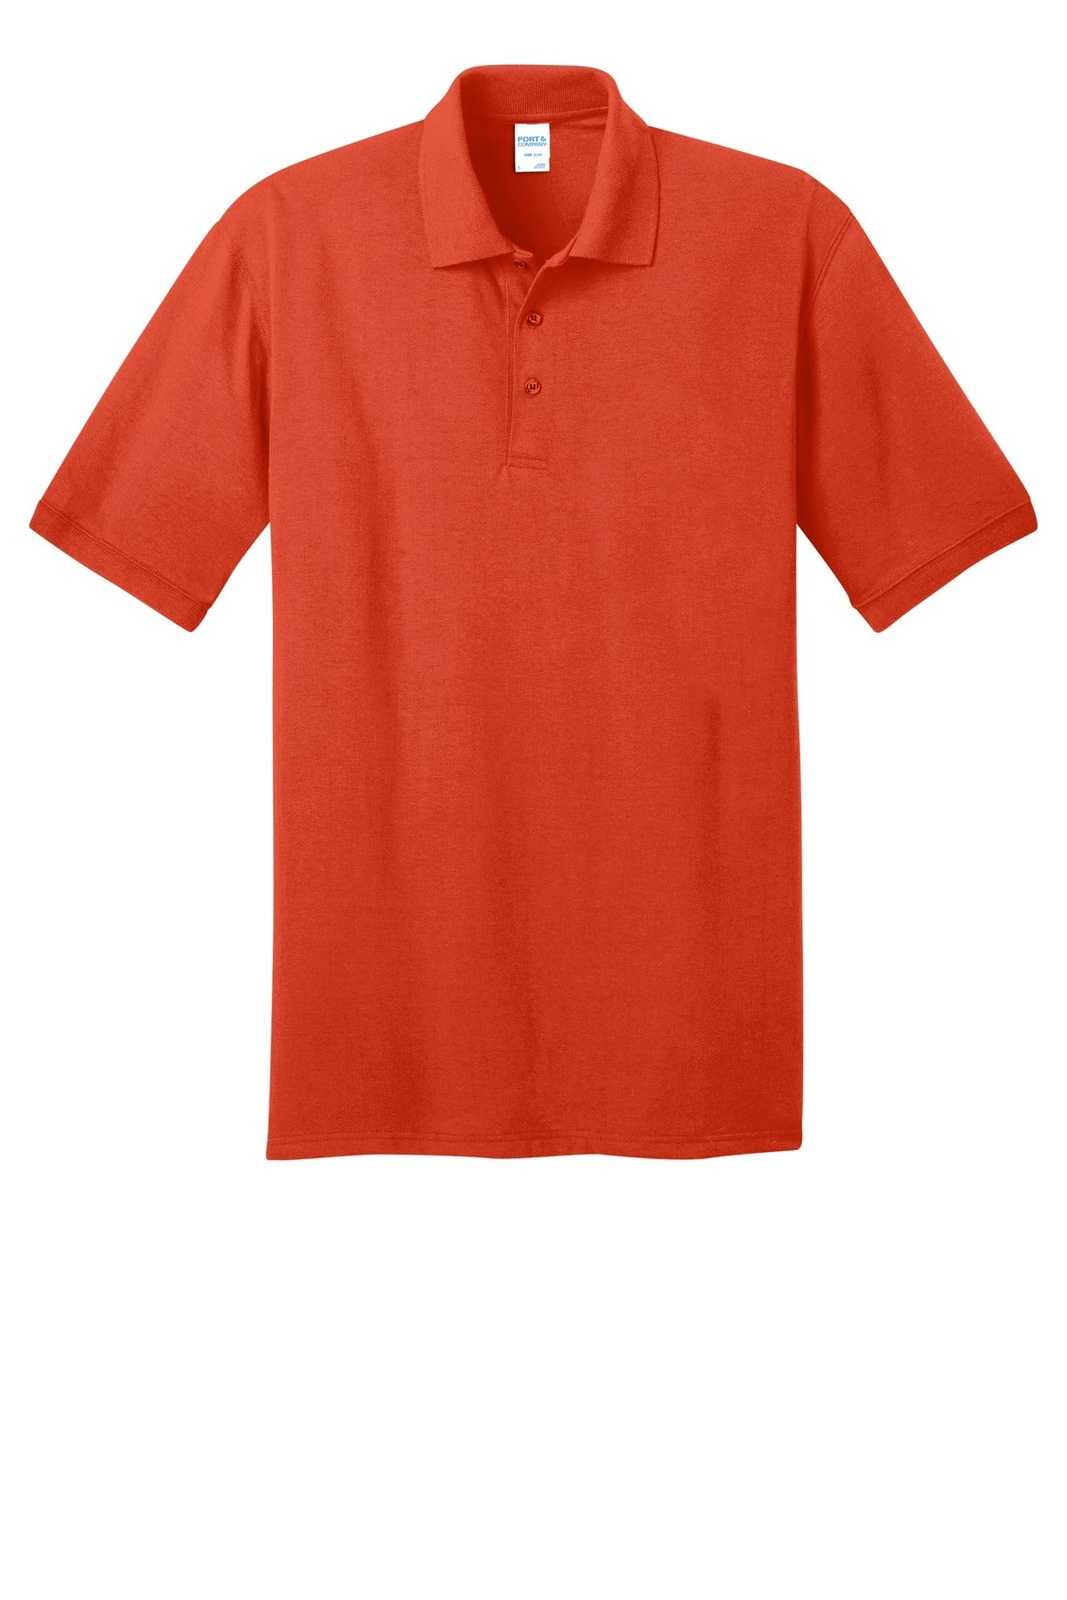 Port & Company KP55T Tall Core Blend Jersey Knit Polo - Orange - HIT a Double - 1